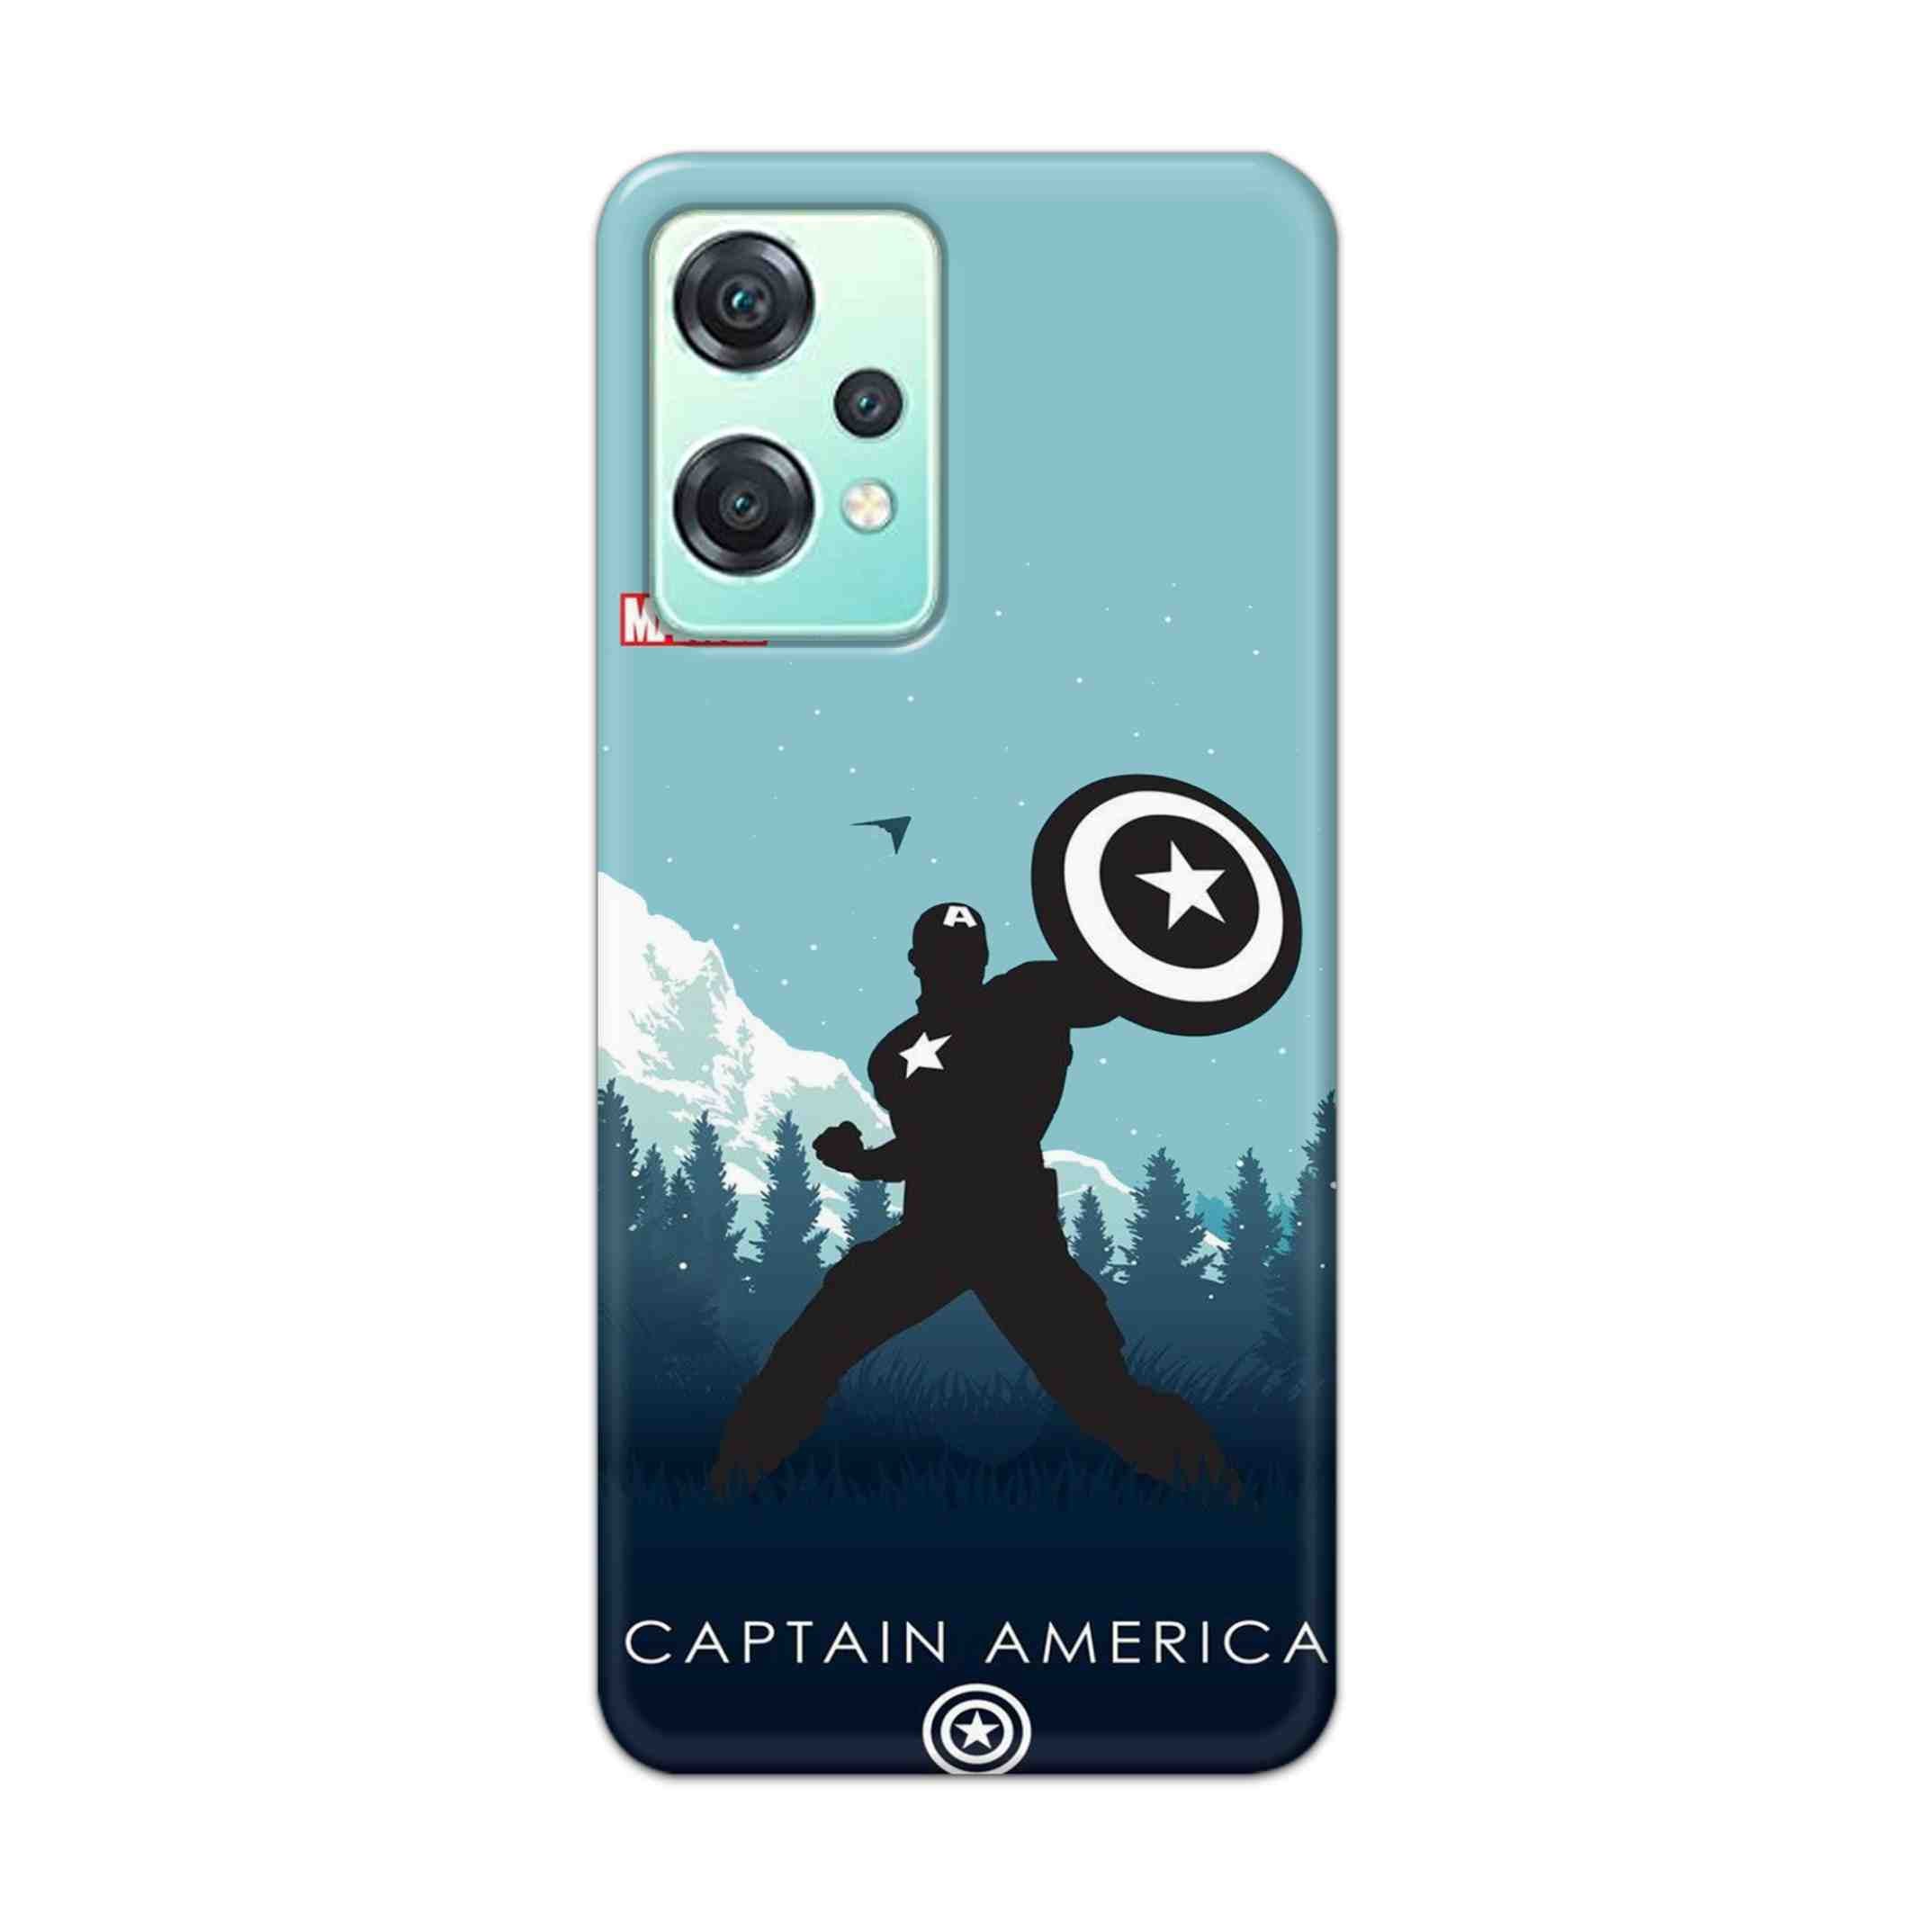 Buy Captain America Hard Back Mobile Phone Case Cover For OnePlus Nord CE 2 Lite 5G Online